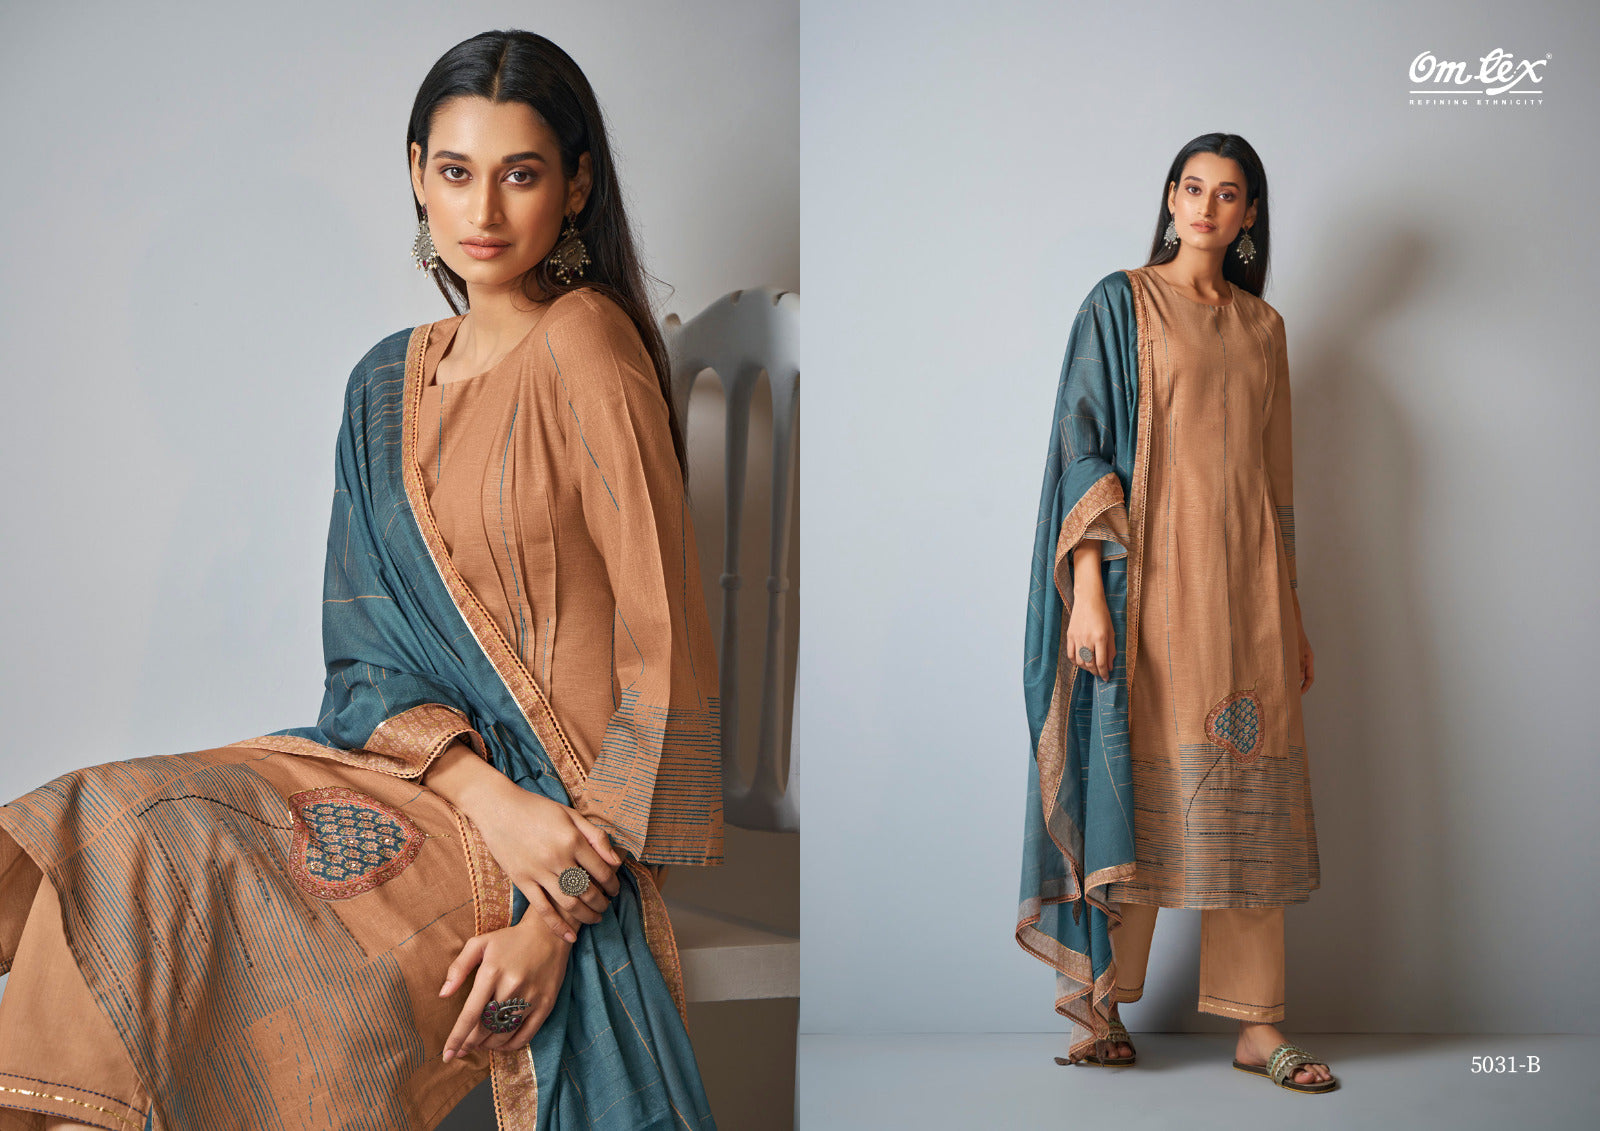 Aapti Omtex Linen Cotton Pant Style Suits